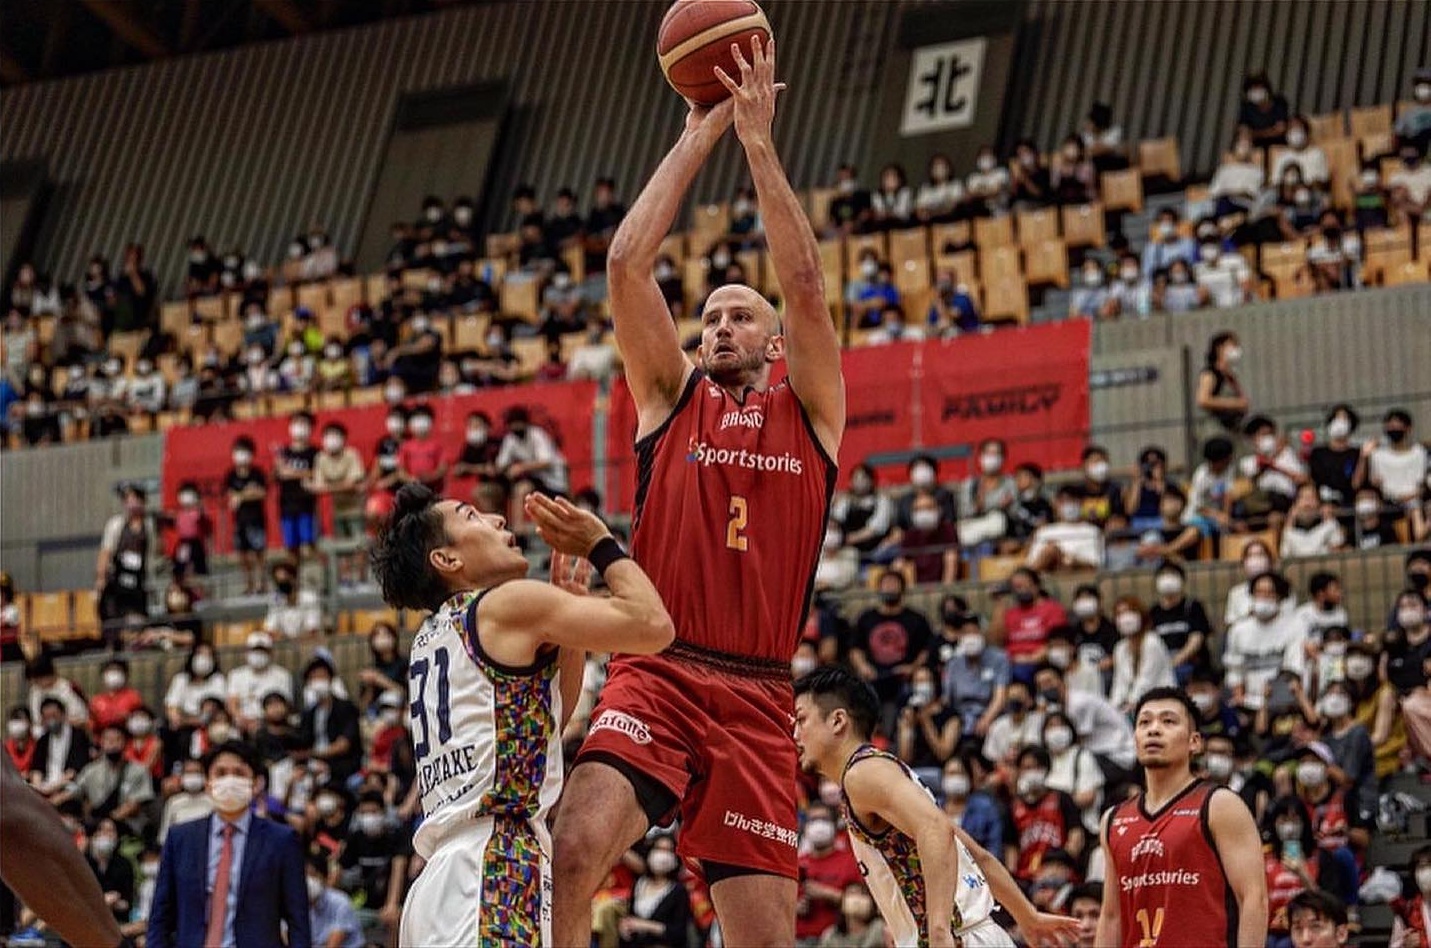 Will Creekmore shoots the ball over an opponent during a game in Japan